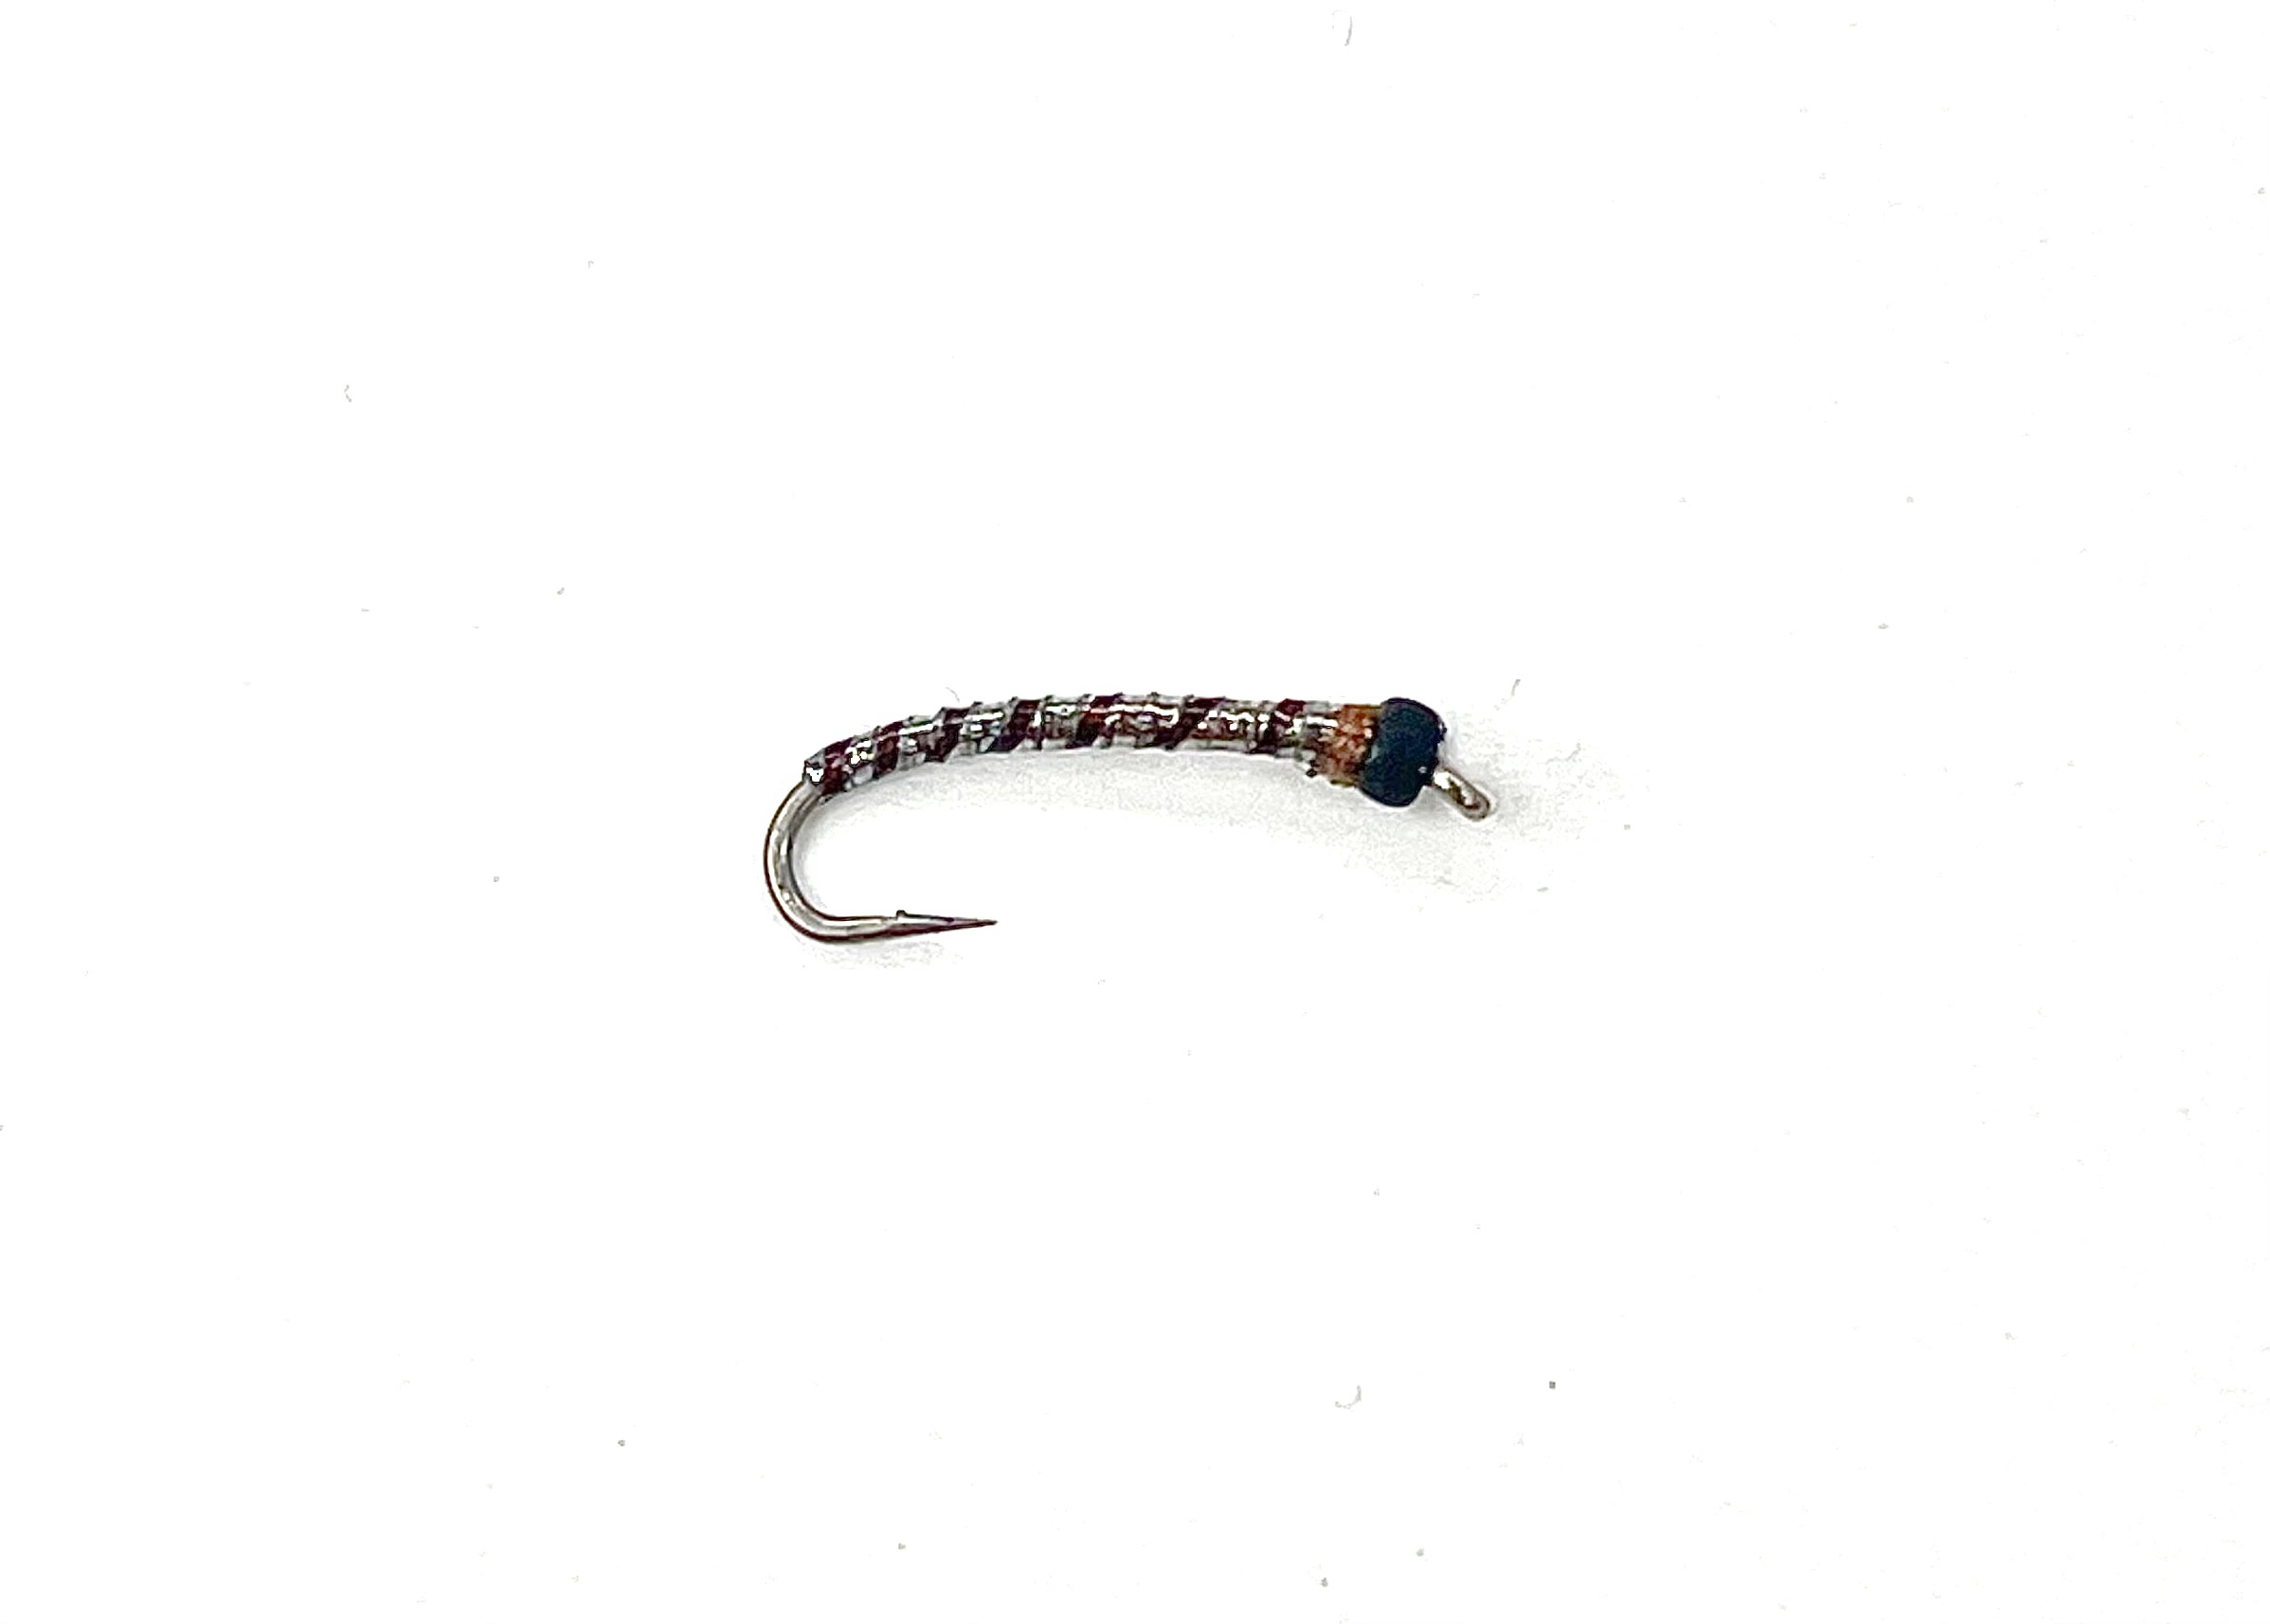 M&Y Cat's Holo Brown Rib ASB Chironomid - Size 16